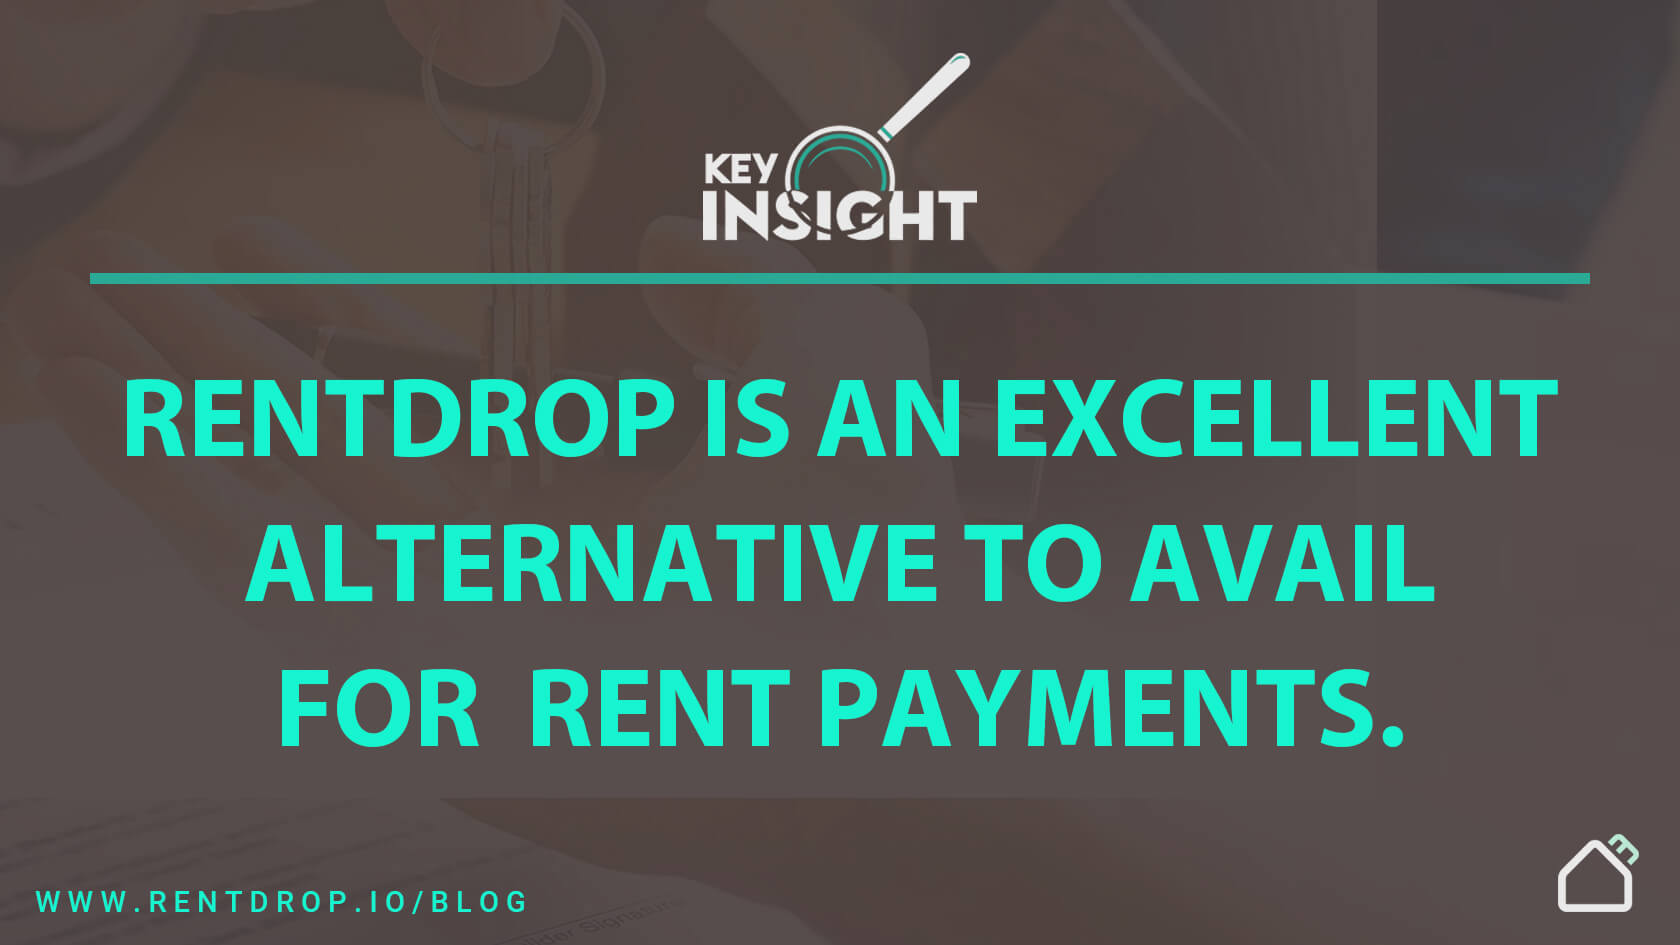 alternatives to avail insight rentdrop